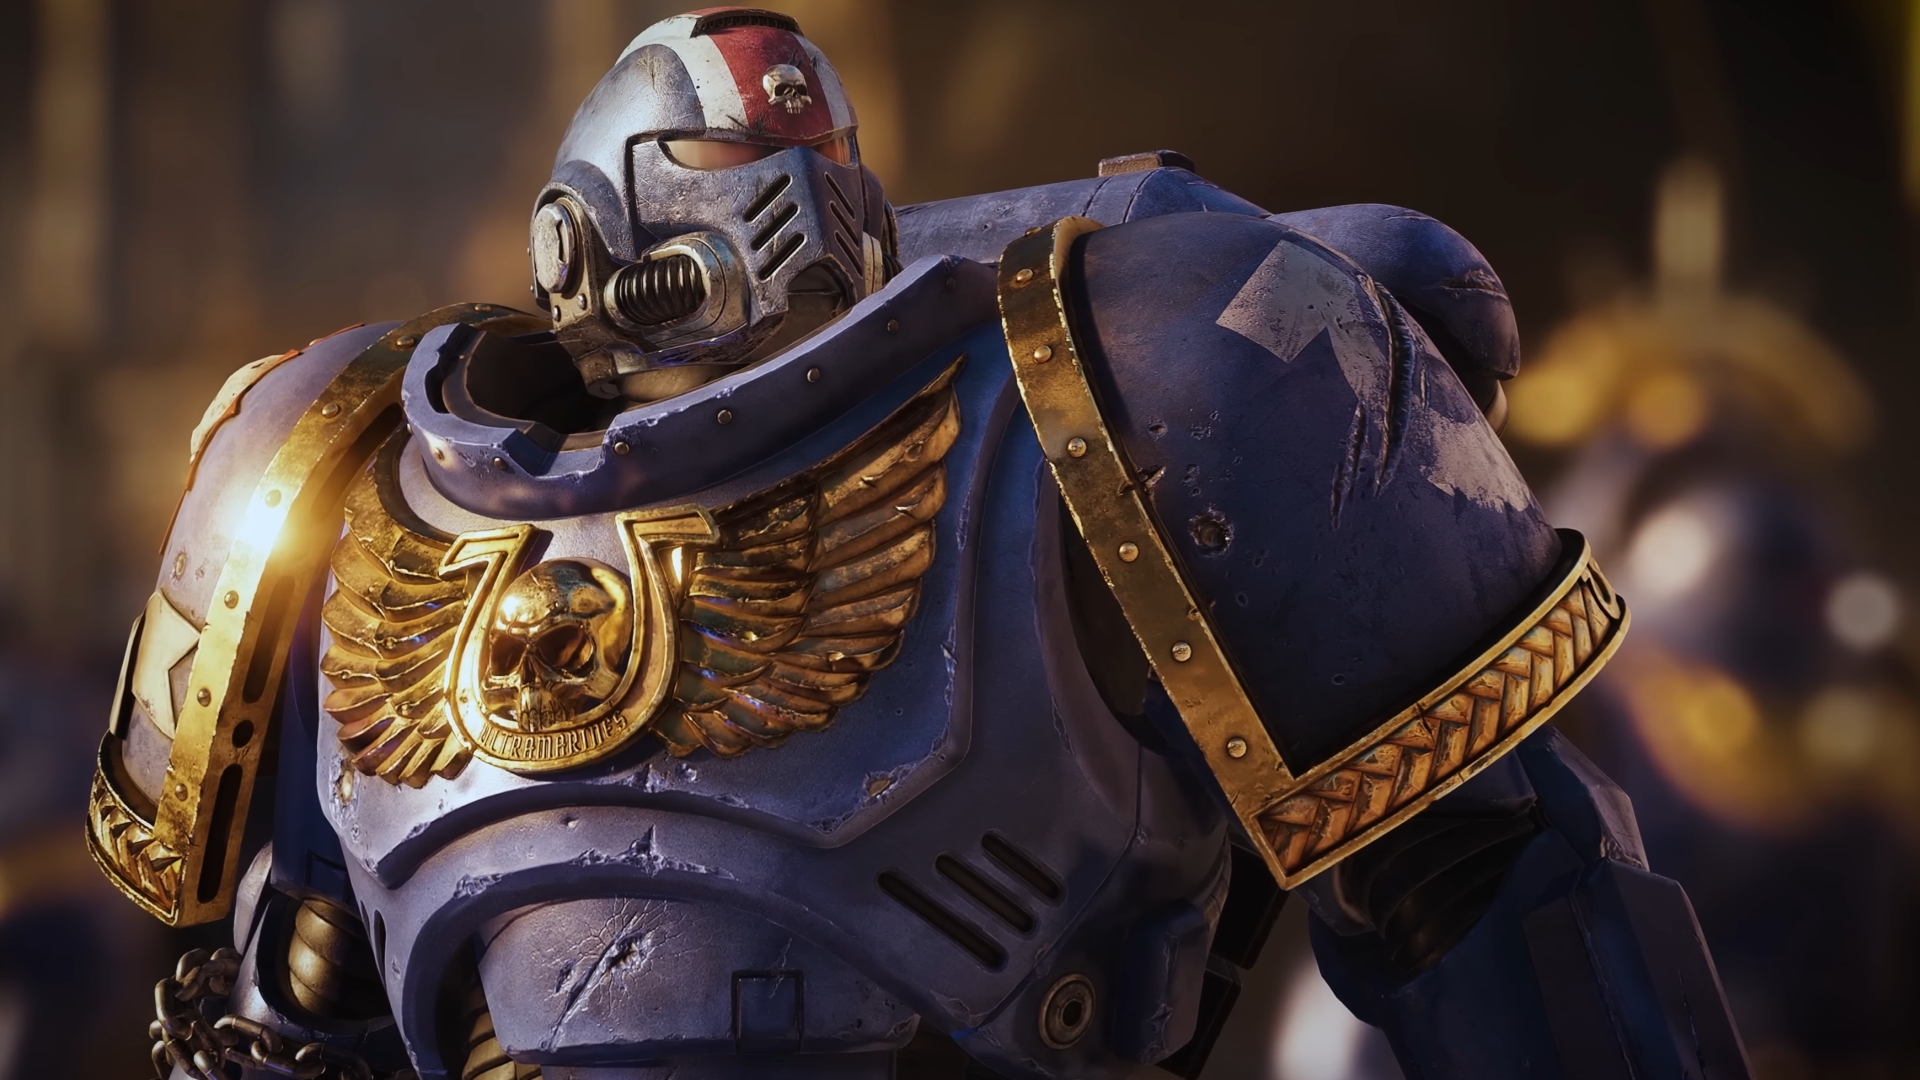  Warhammer 40,000: Space Marine 2 looks awesome in its first gameplay trailer 